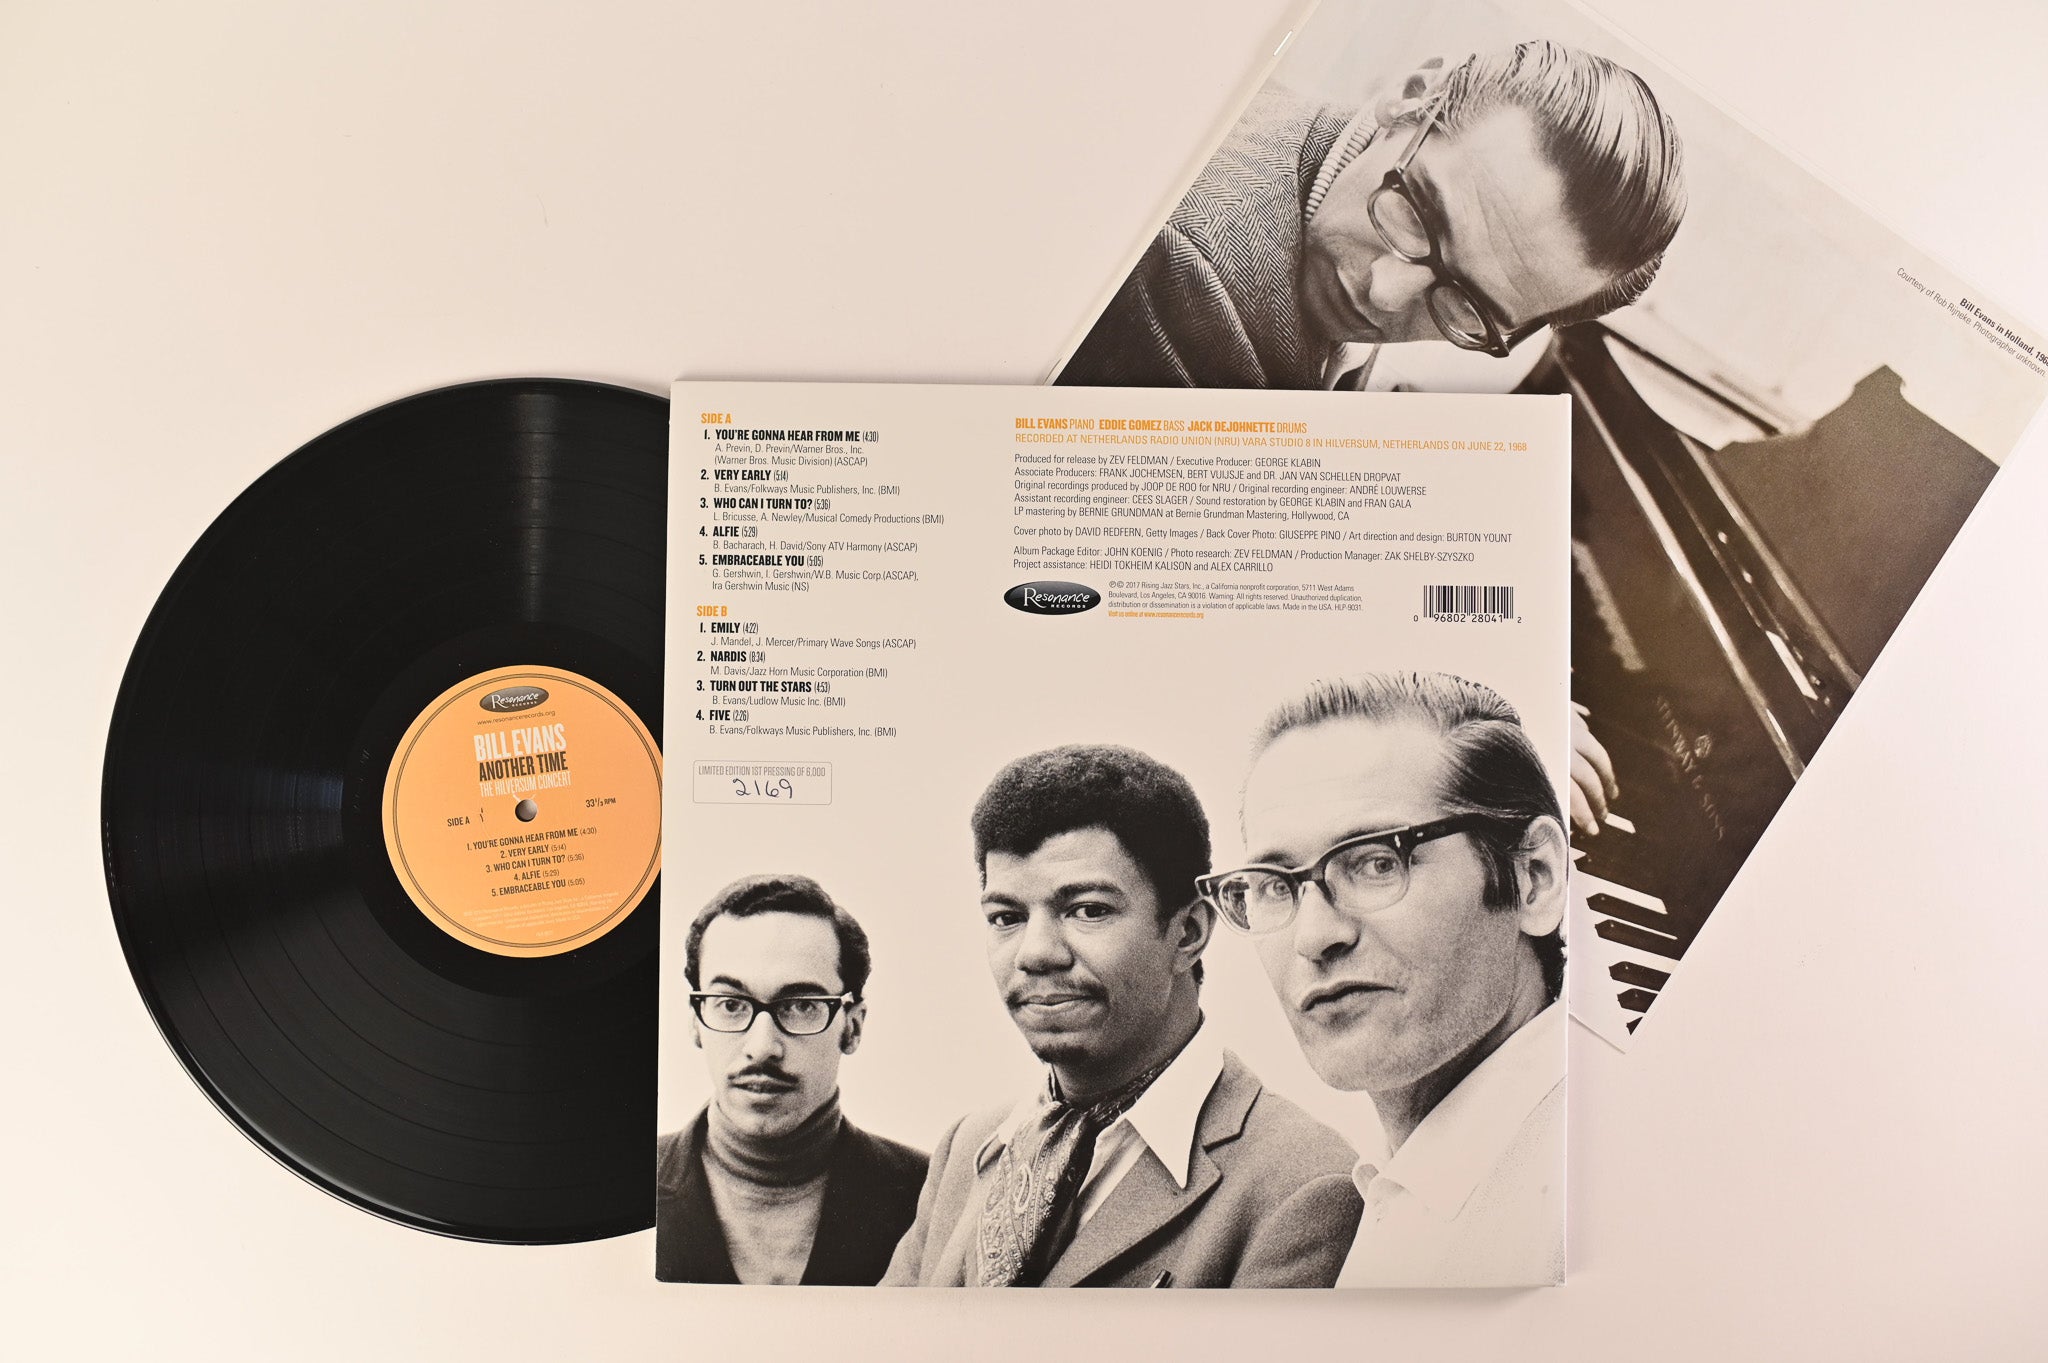 Bill Evans - Another Time (The Hilversum Concert) on Resonance Ltd Numbered RSD Deluxe Edition